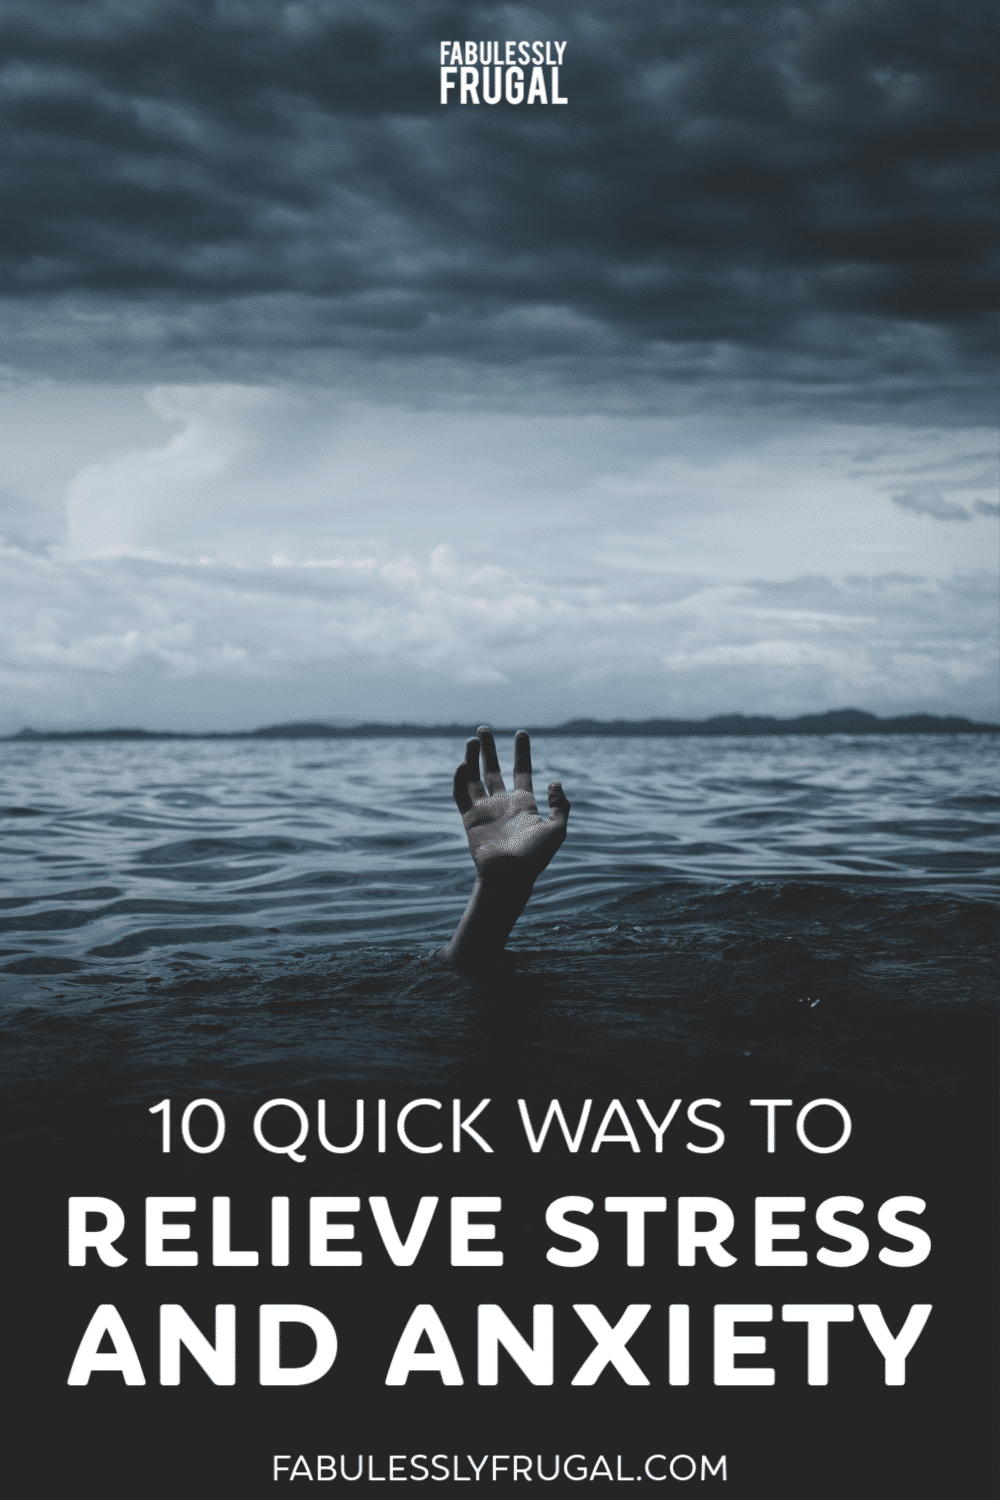 Ways to relieve stress and anxiety